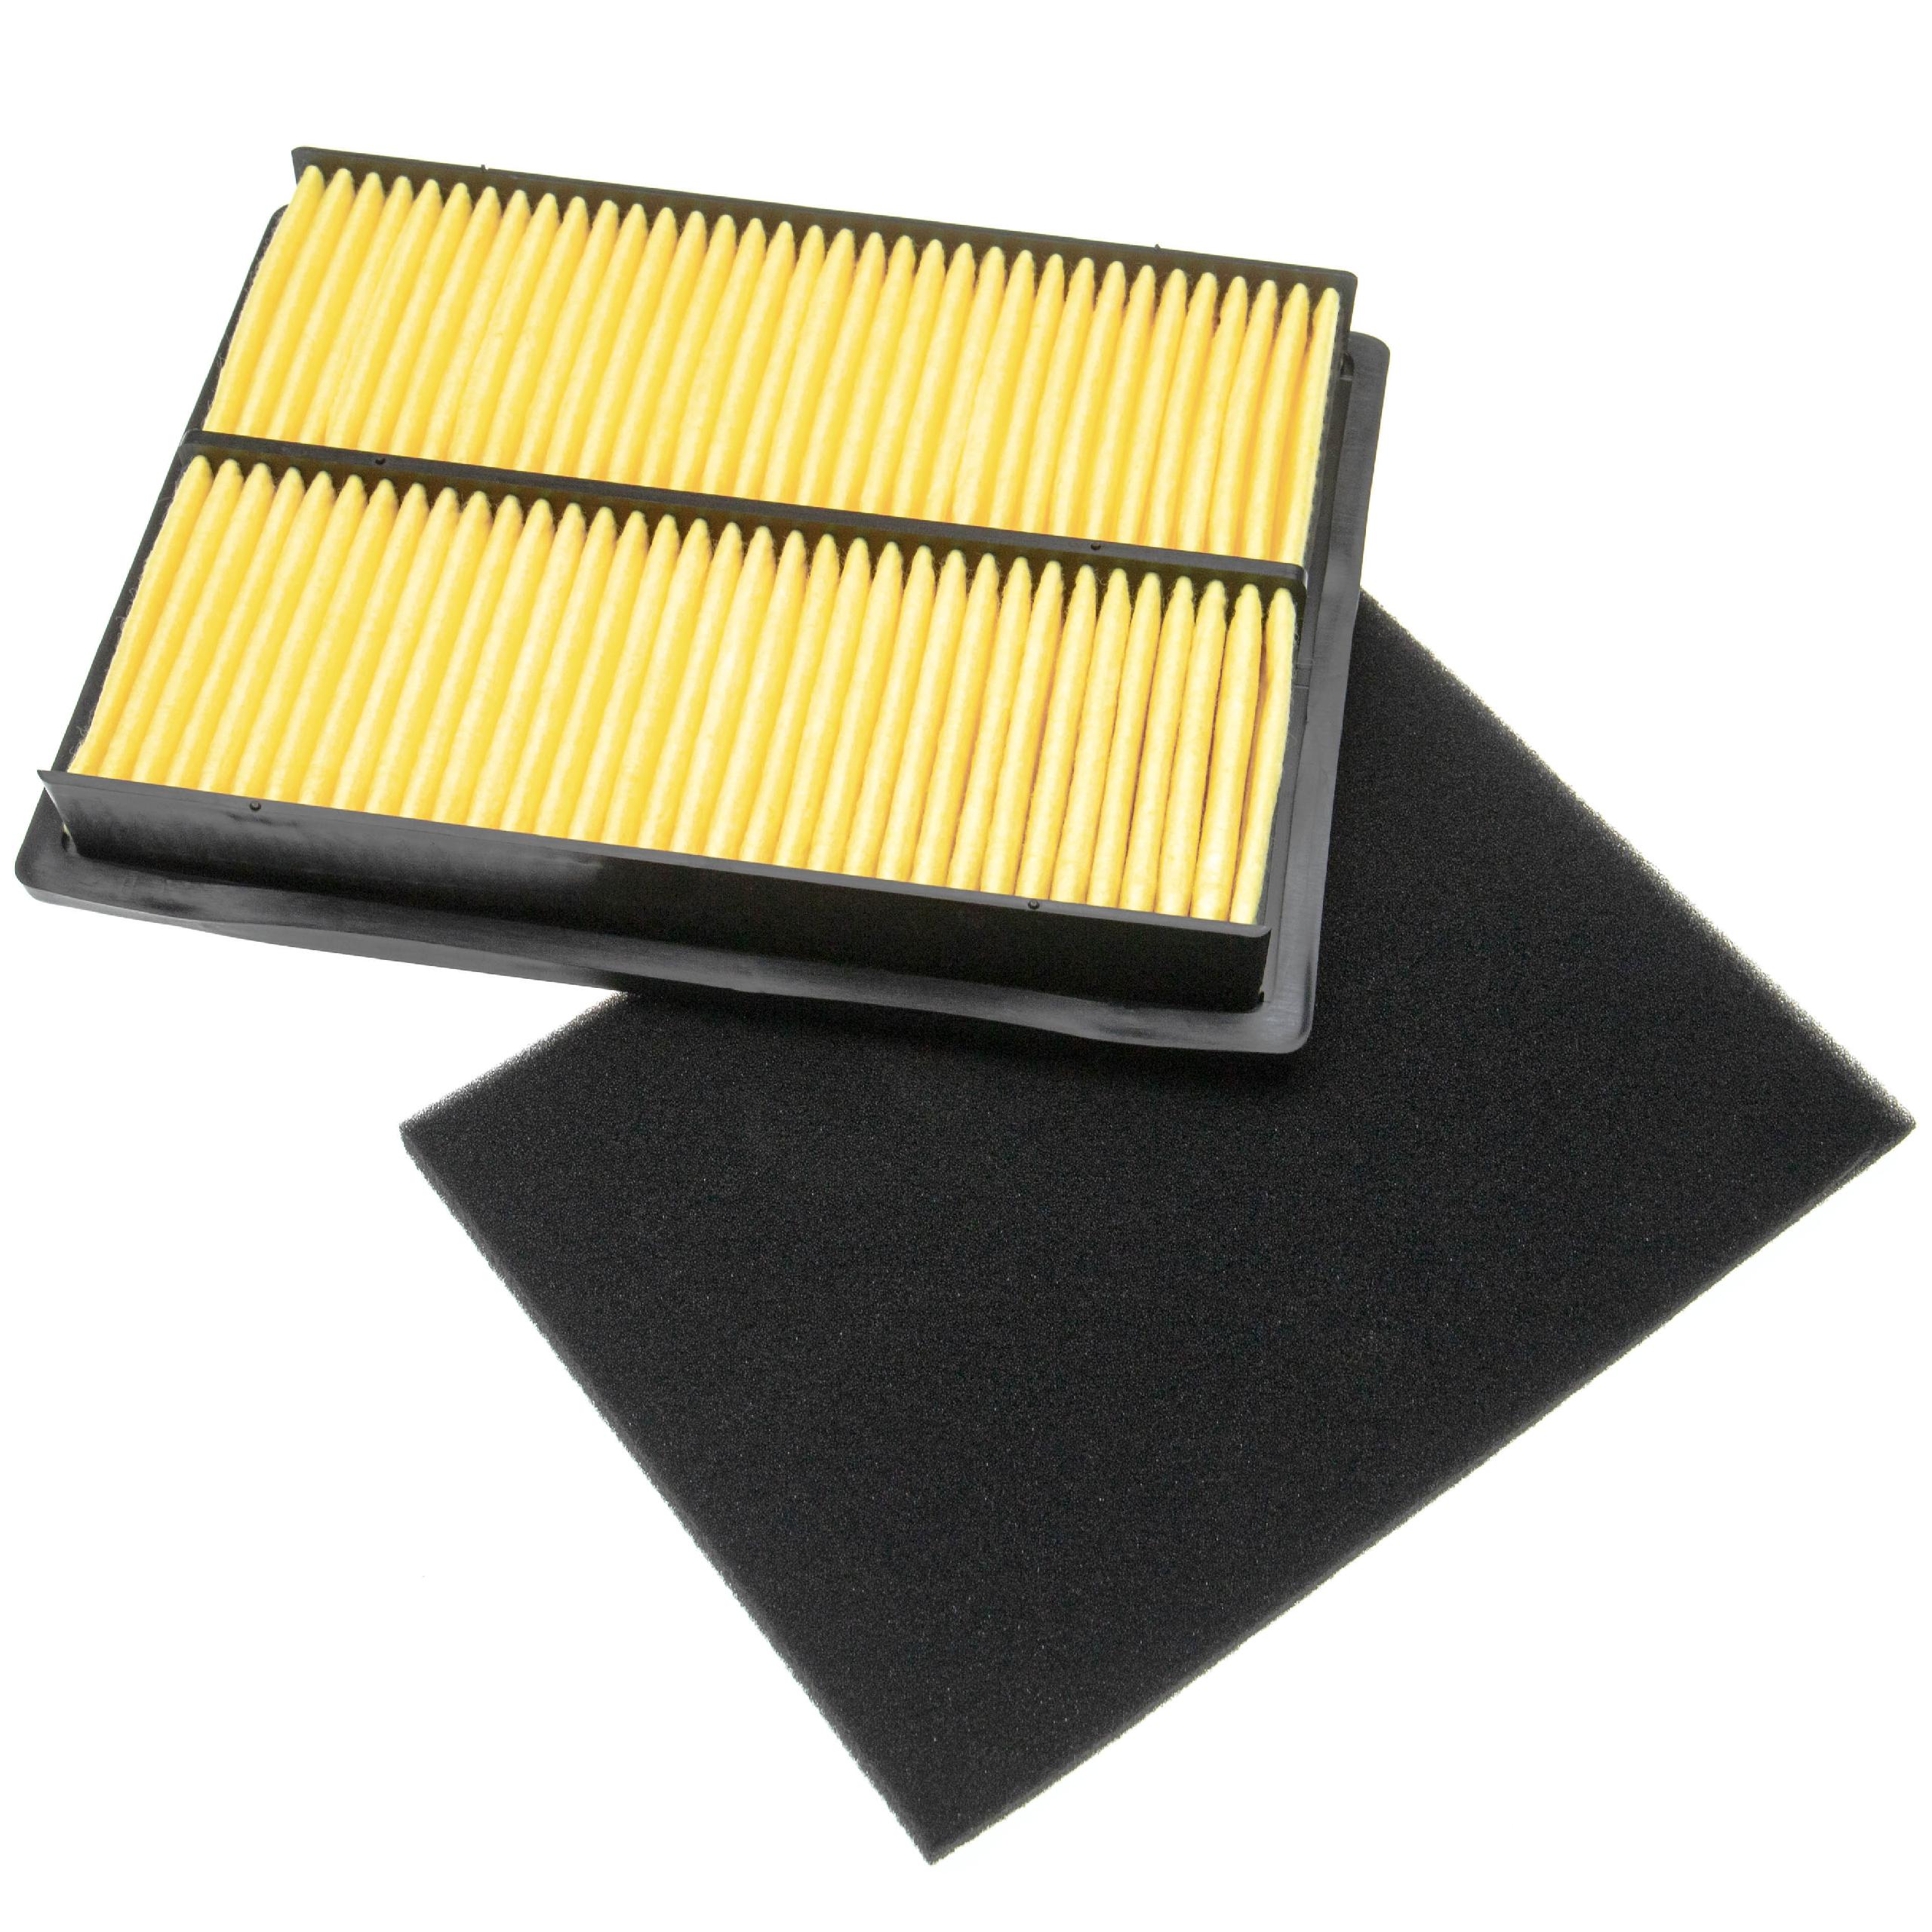 Filter Set as Spare for Honda 17210-ZJ1-842, 17210-ZJ1-841 for Lawn Tractor - 1x pre-filter, 1x air filter